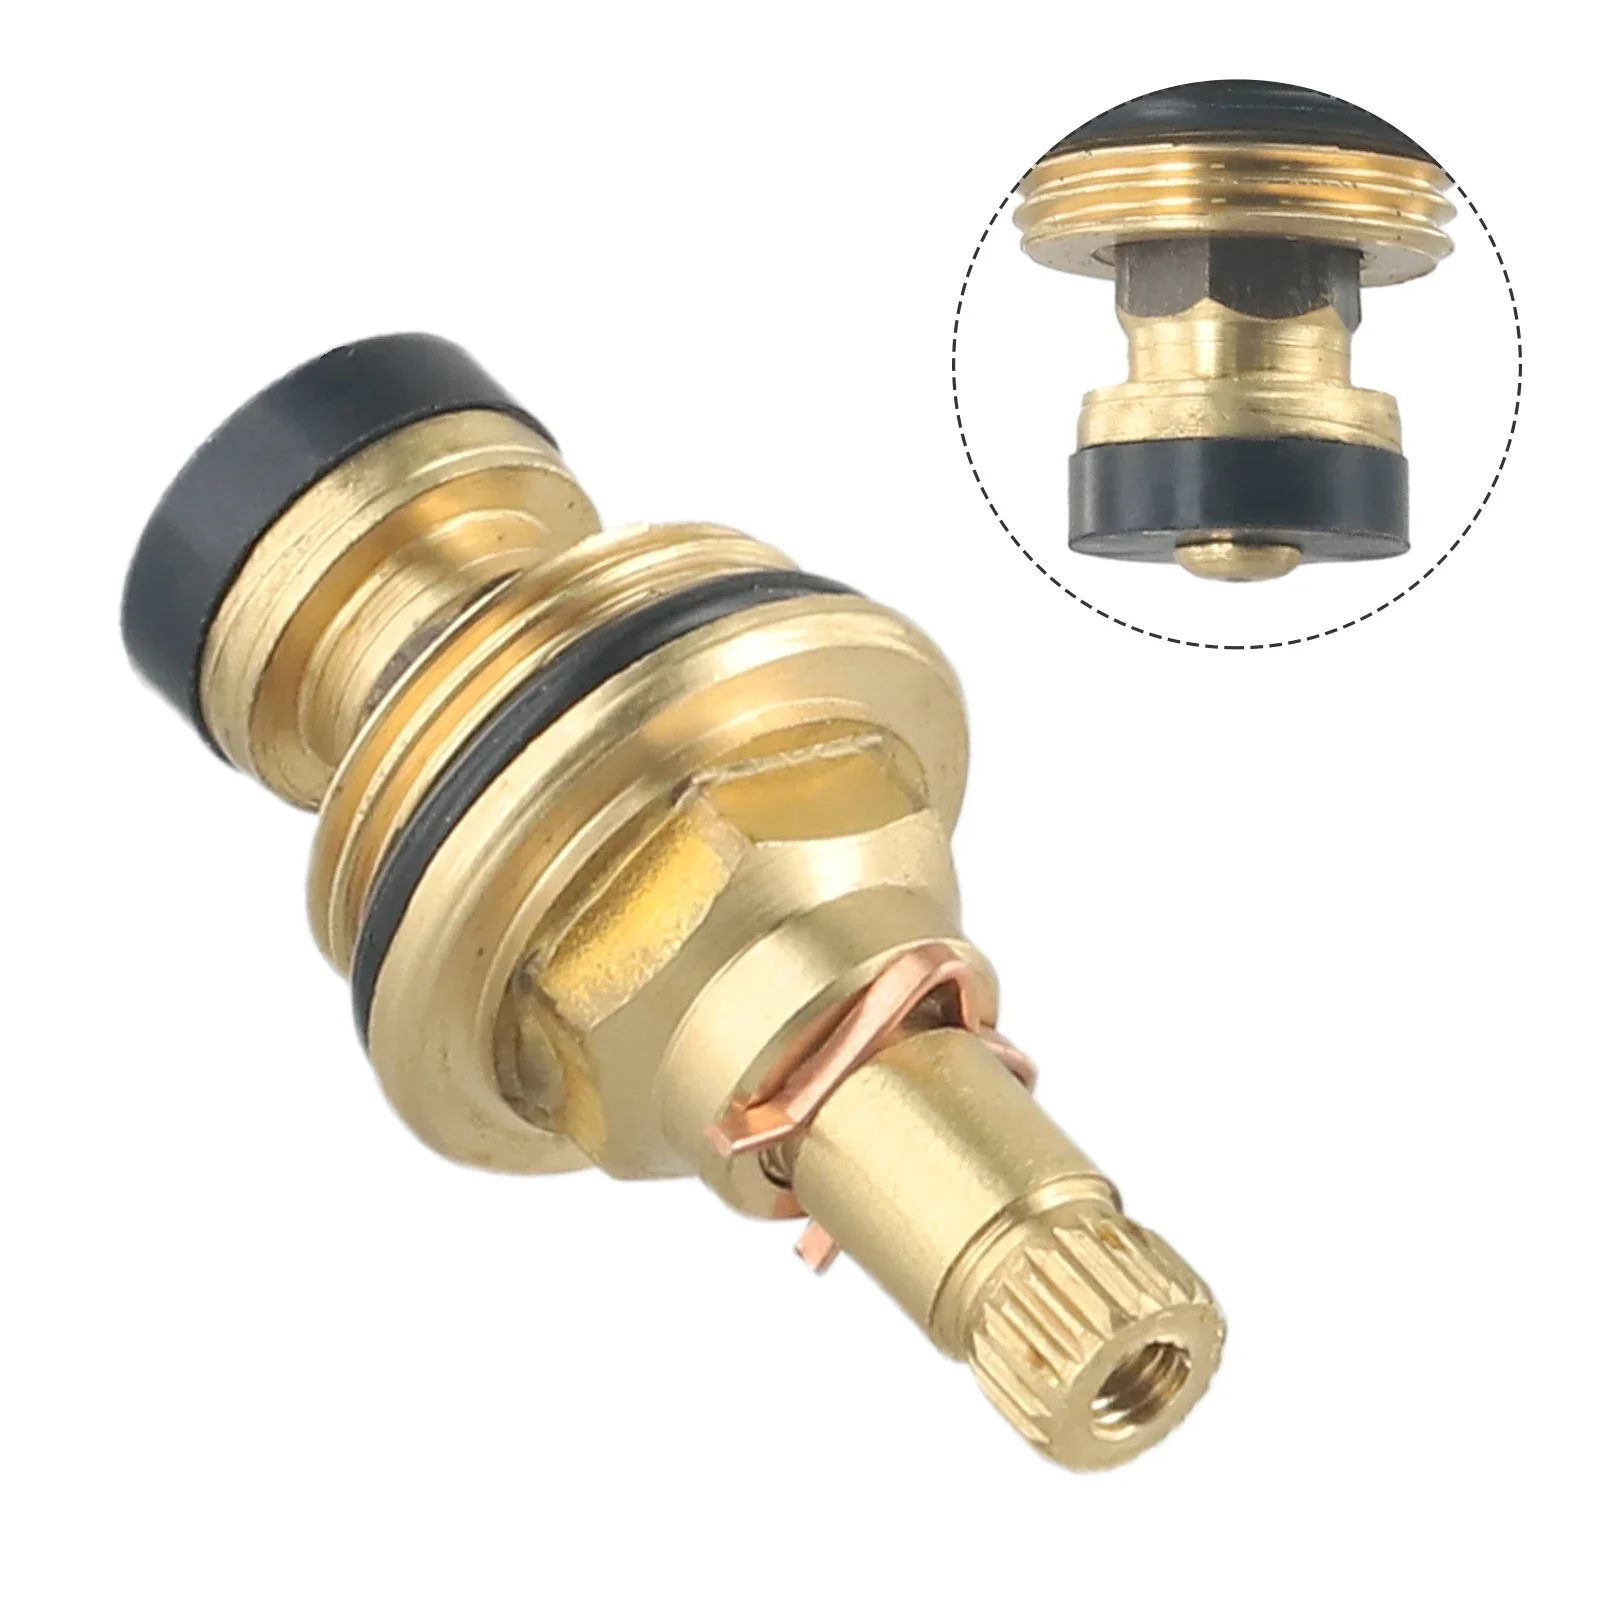 

Brass Faucet Tap Valve Spool Faucet Cartridge Hot And Cold Water Spool G1/2 Bsp 20 Tooth Cartridge Valves Bathroom Access